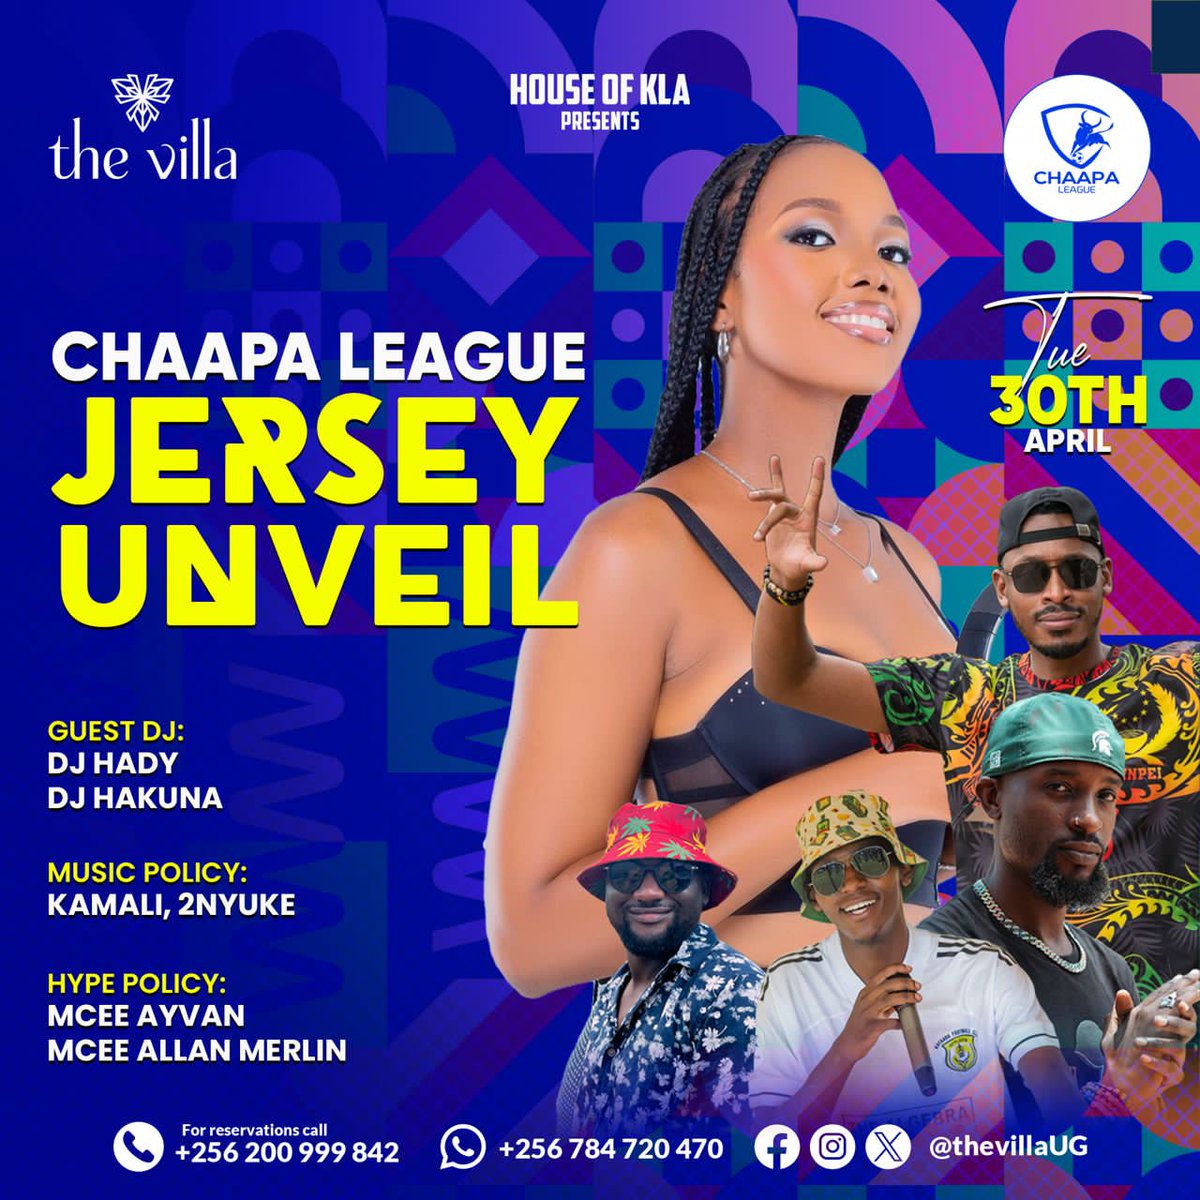 What's happening at @thevillaUG - @ChaapaLeague unveiling their Season 9 kits... @Kamali_21 and 2Nyuke(@FelixDonBash ) welcoming Mandem and @djhady01 on that music policy plan... Party starts at 6pm till late... #obunuzi9 #chaapaleague9 #HouseofKla #TheVillaXperience